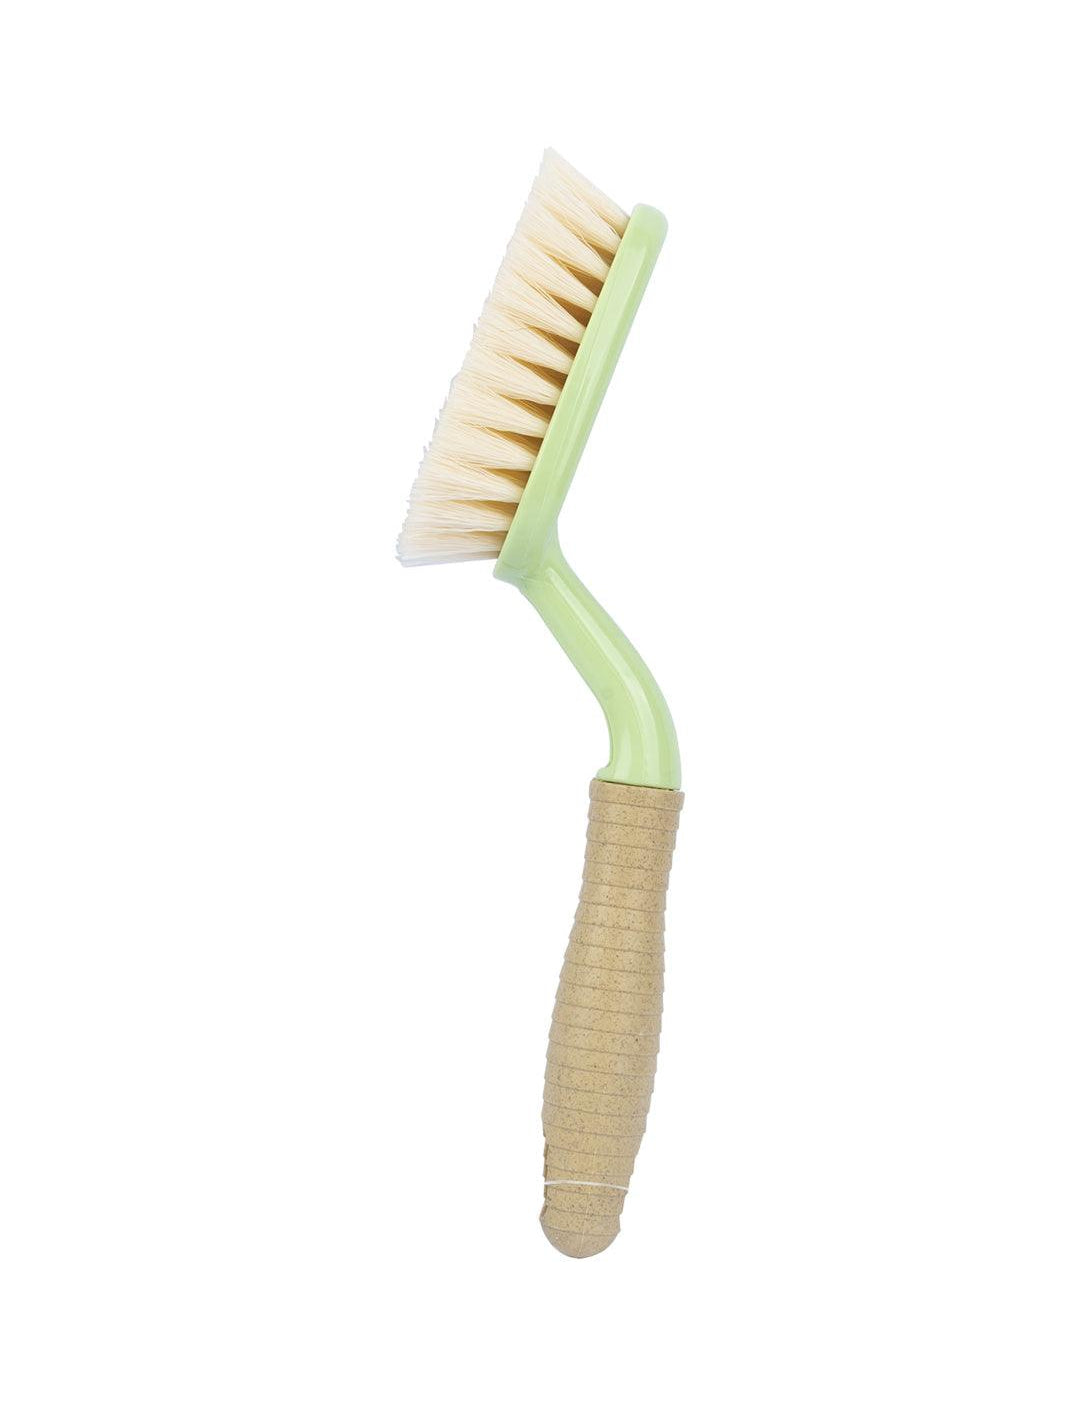 Plastic Dish Cleaning Brush with Long Bristle & Handle